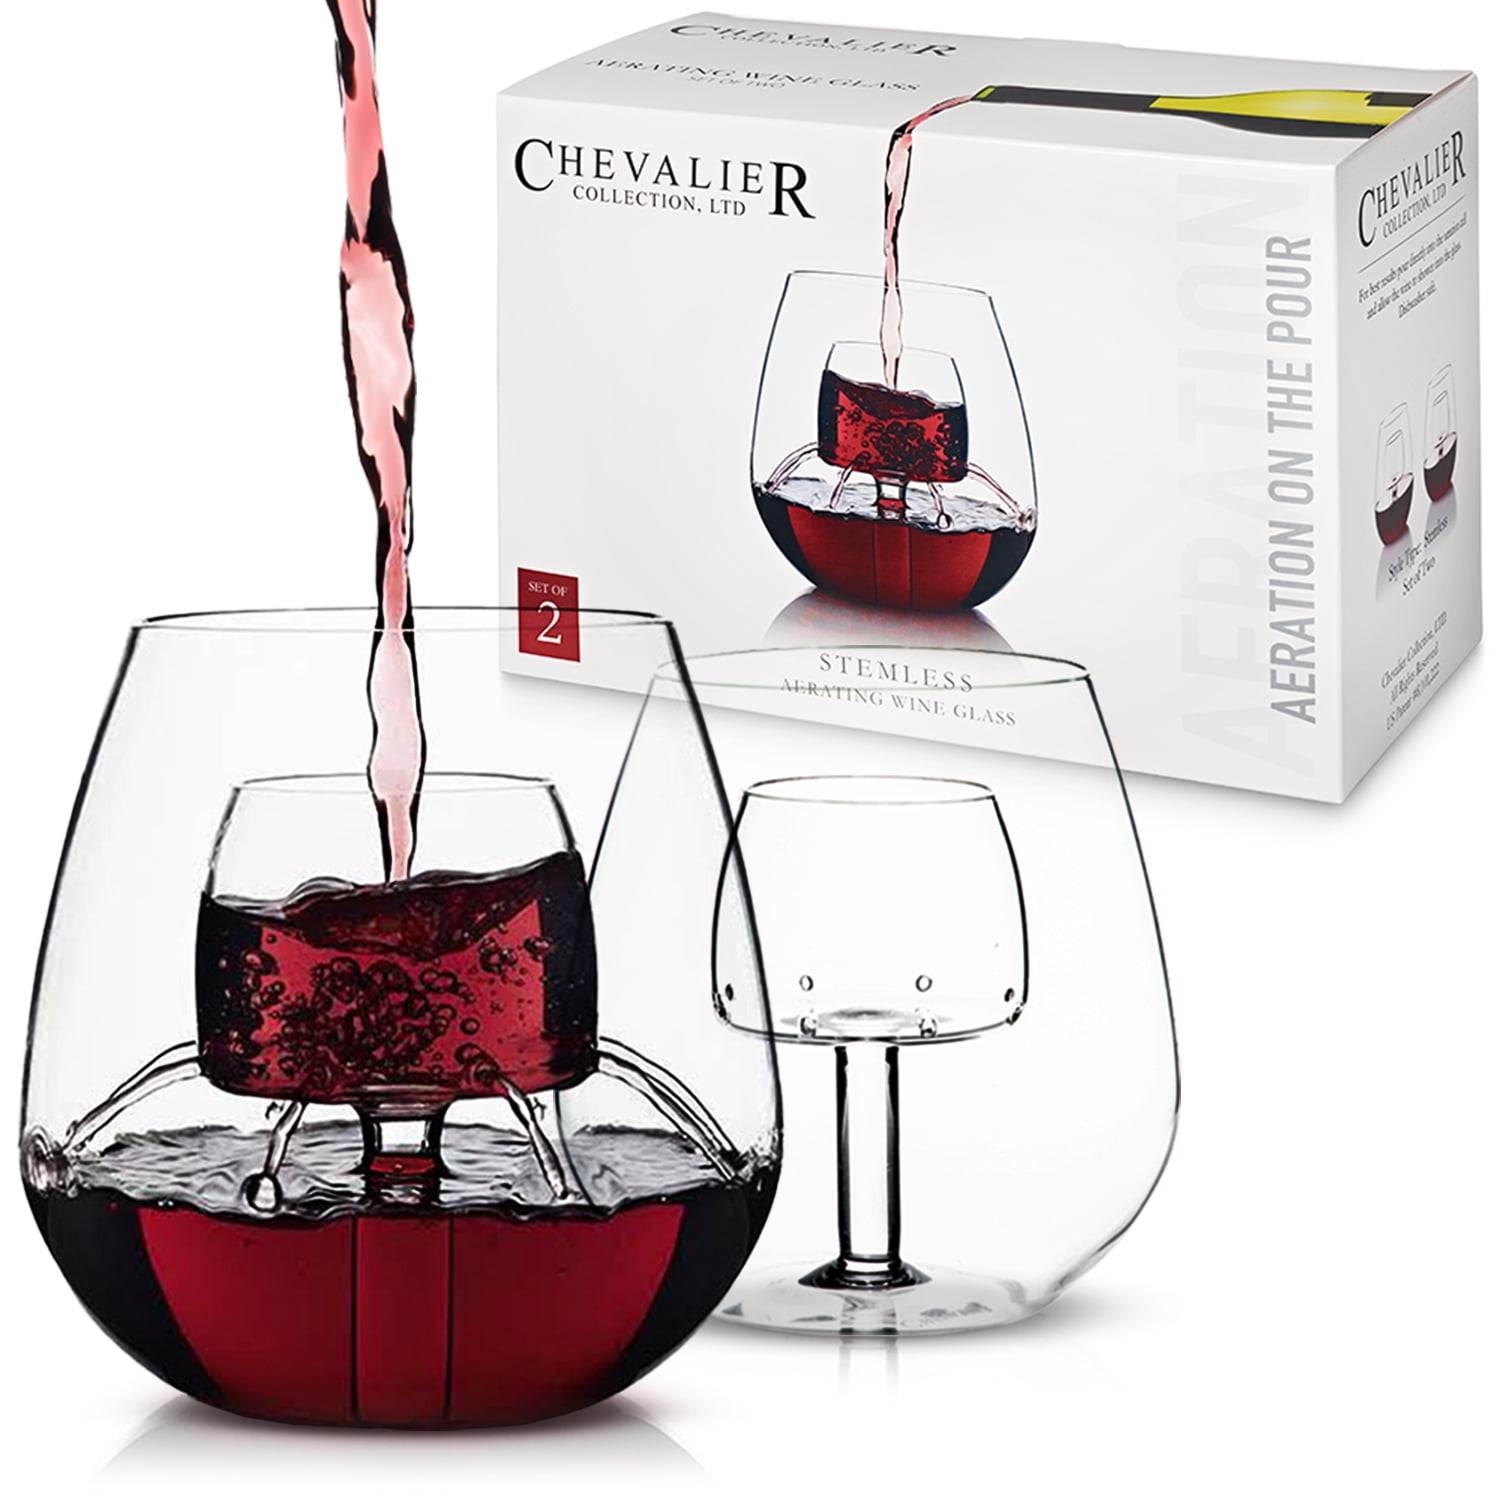 Ello Cru Stemless Wine Glass Set with Silicone Protection, 4 Pack, Paloma 